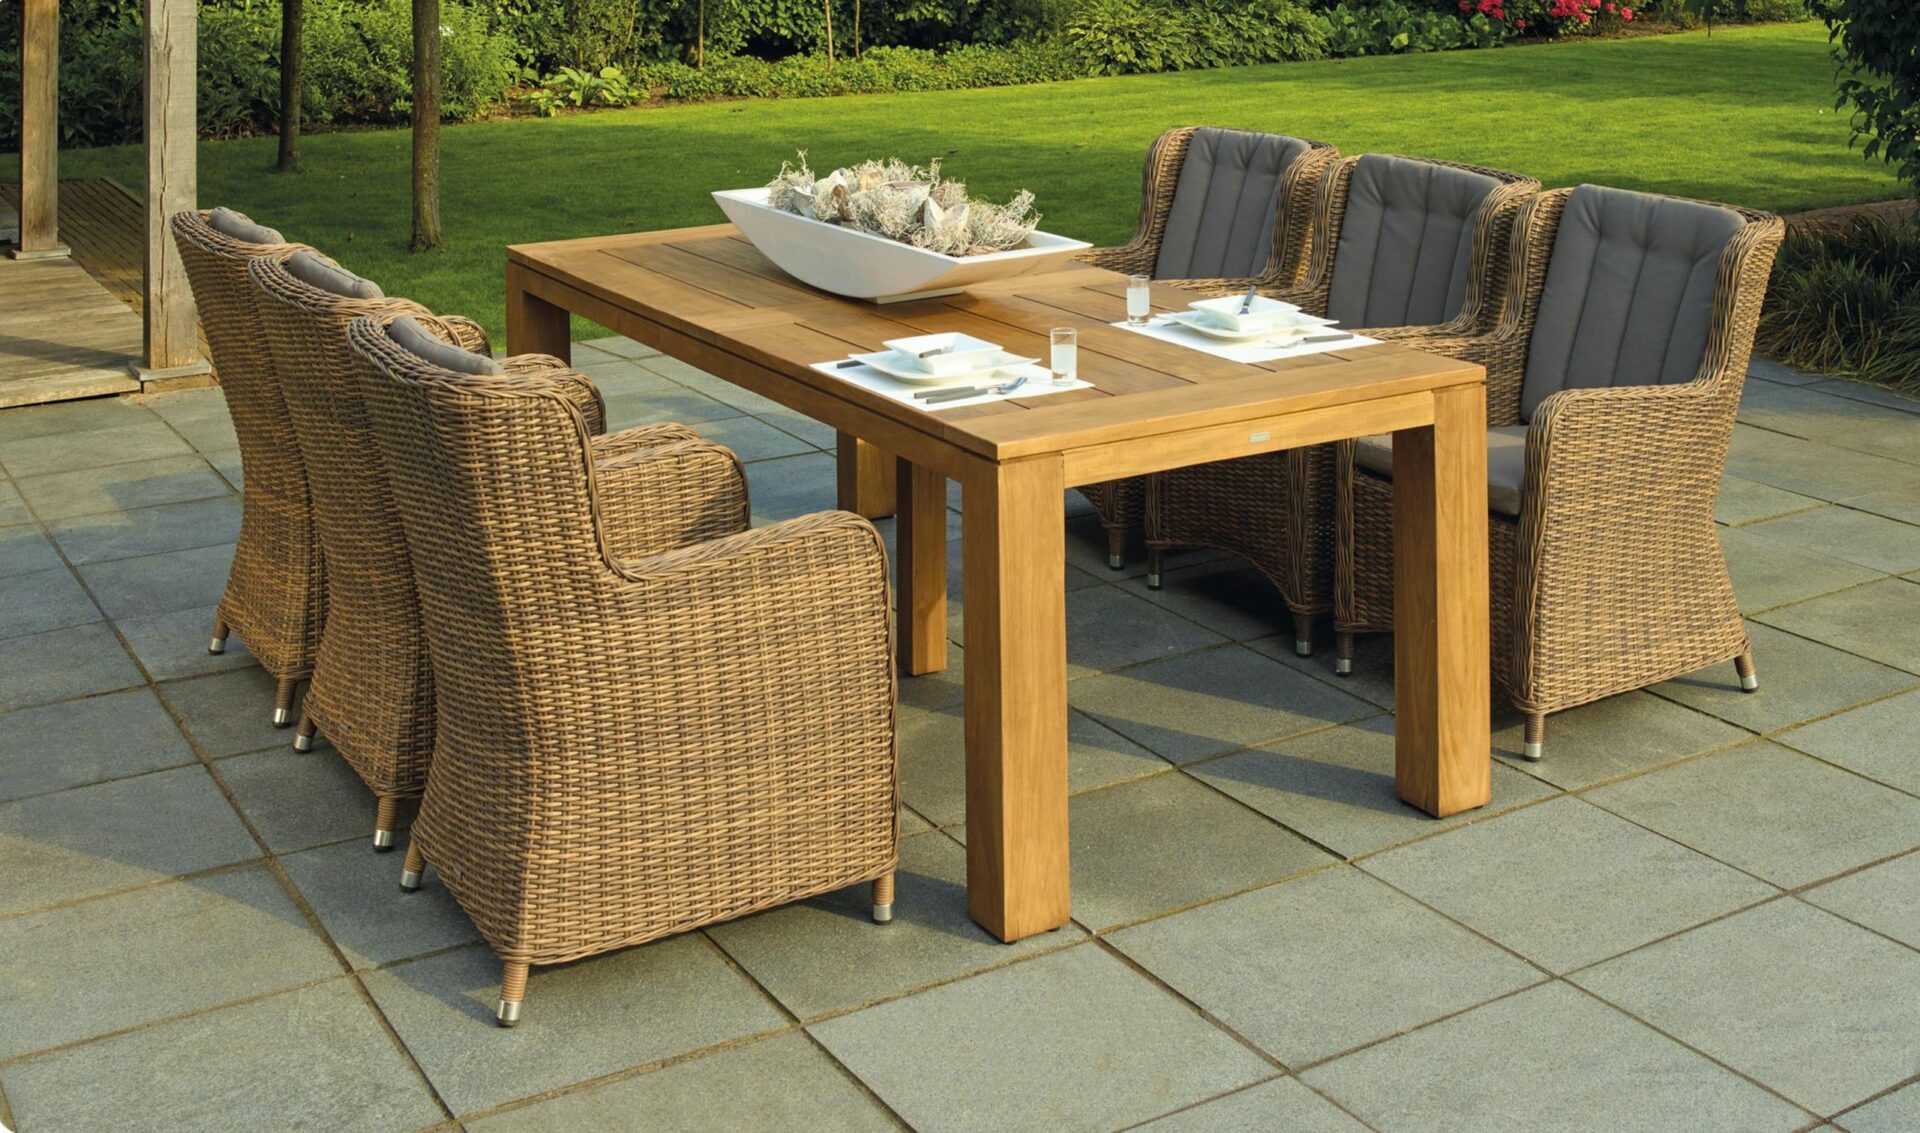 Tips to Buying New Garden Furniture